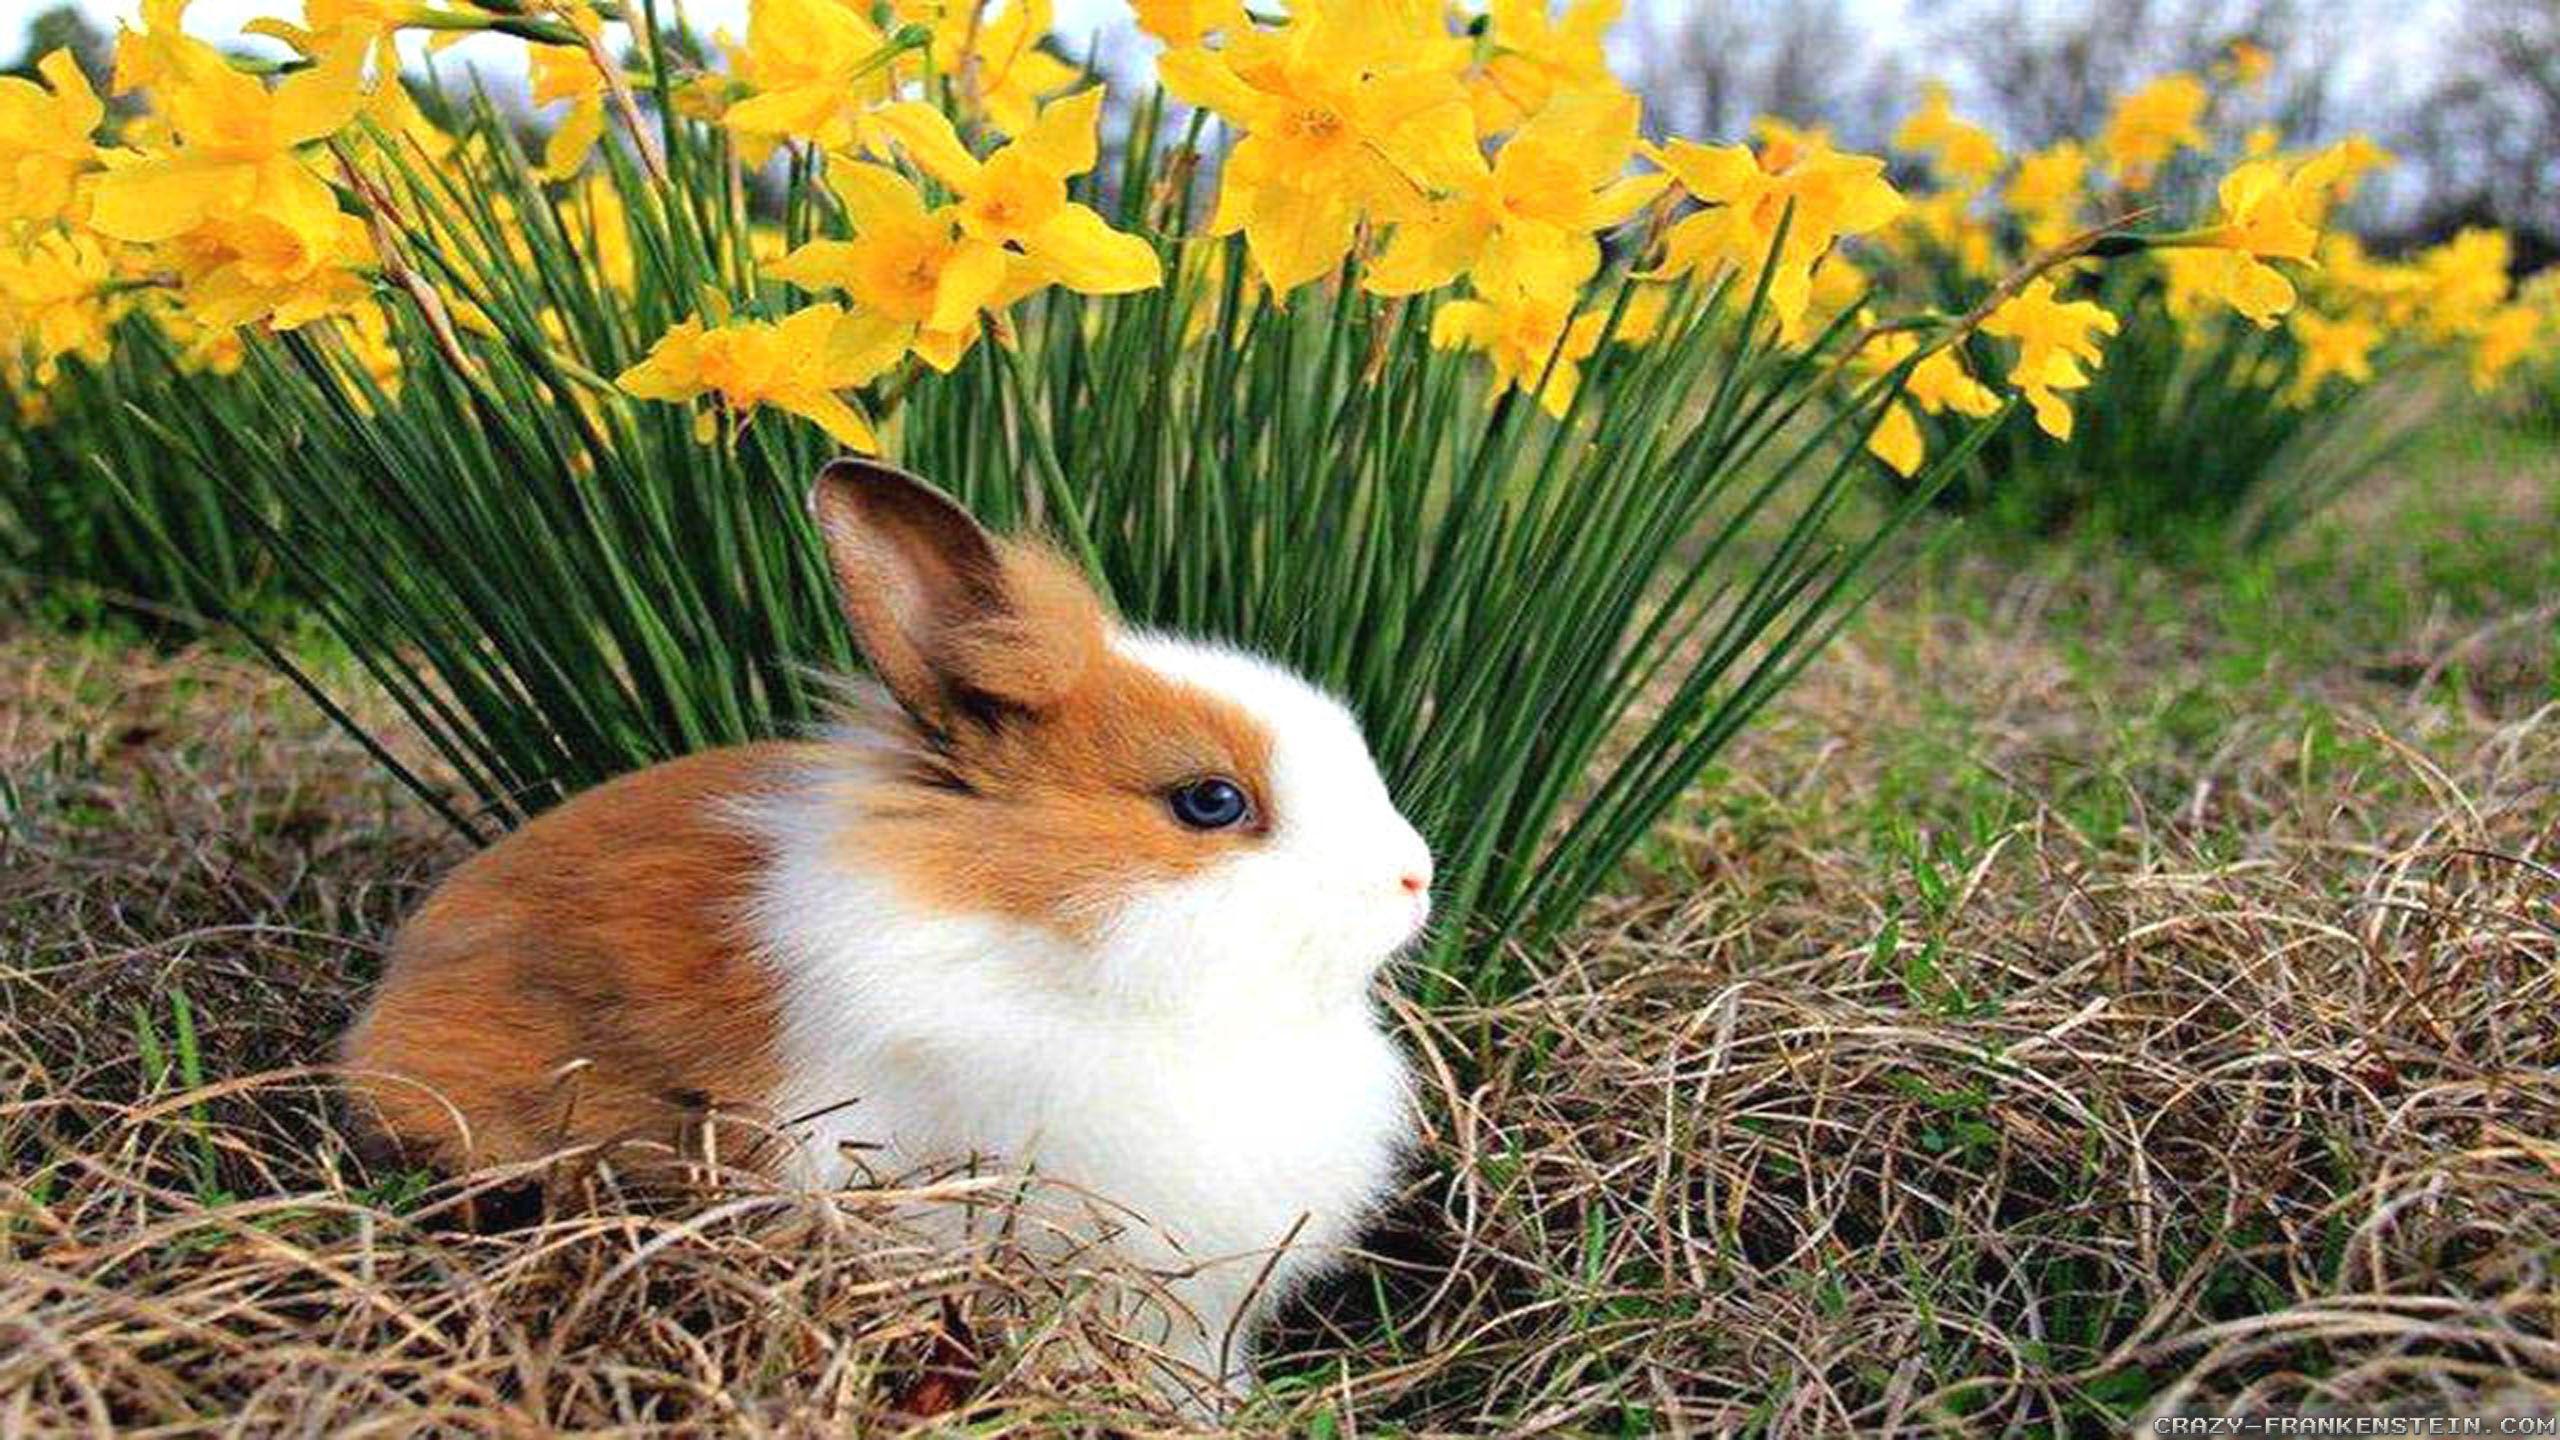 Cute Animals In Spring Wallpapers - Wallpaper Cave